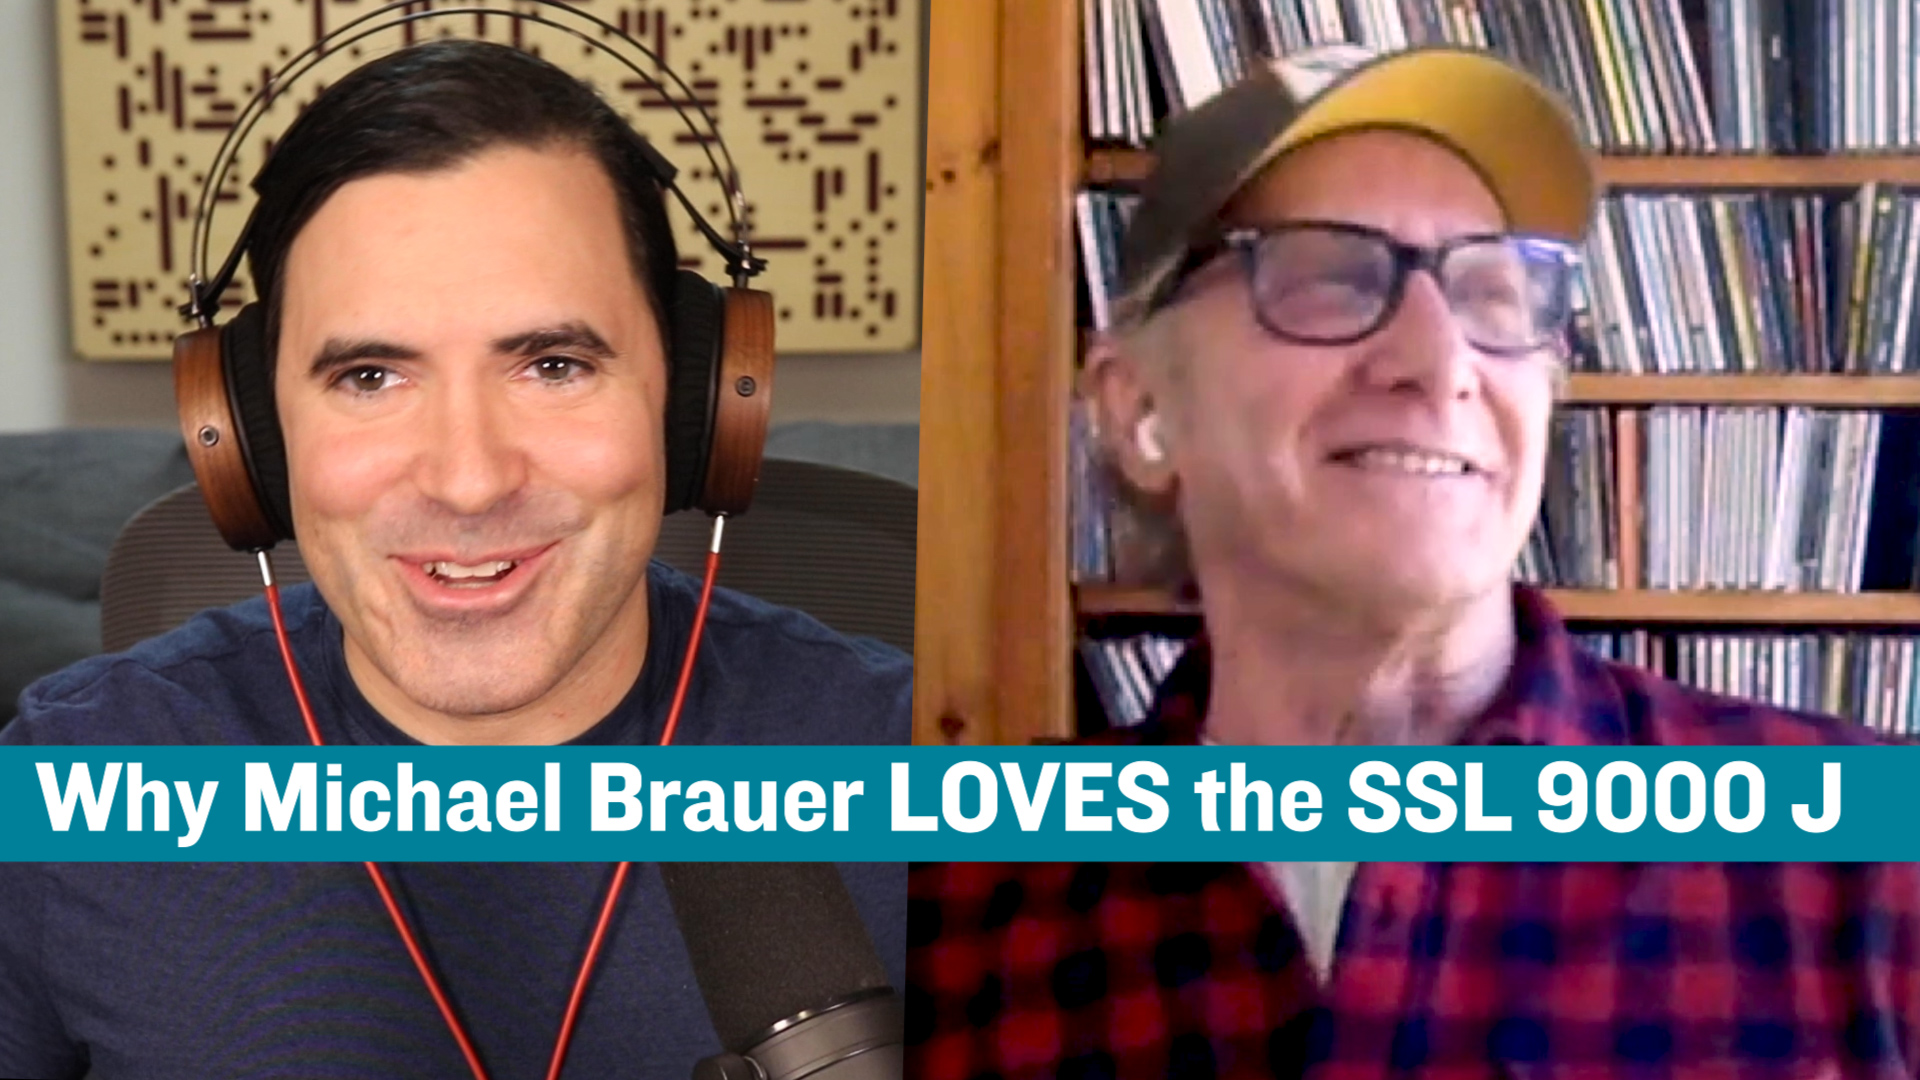 Michael Brauer on Why He Loves the SSL 9000 J